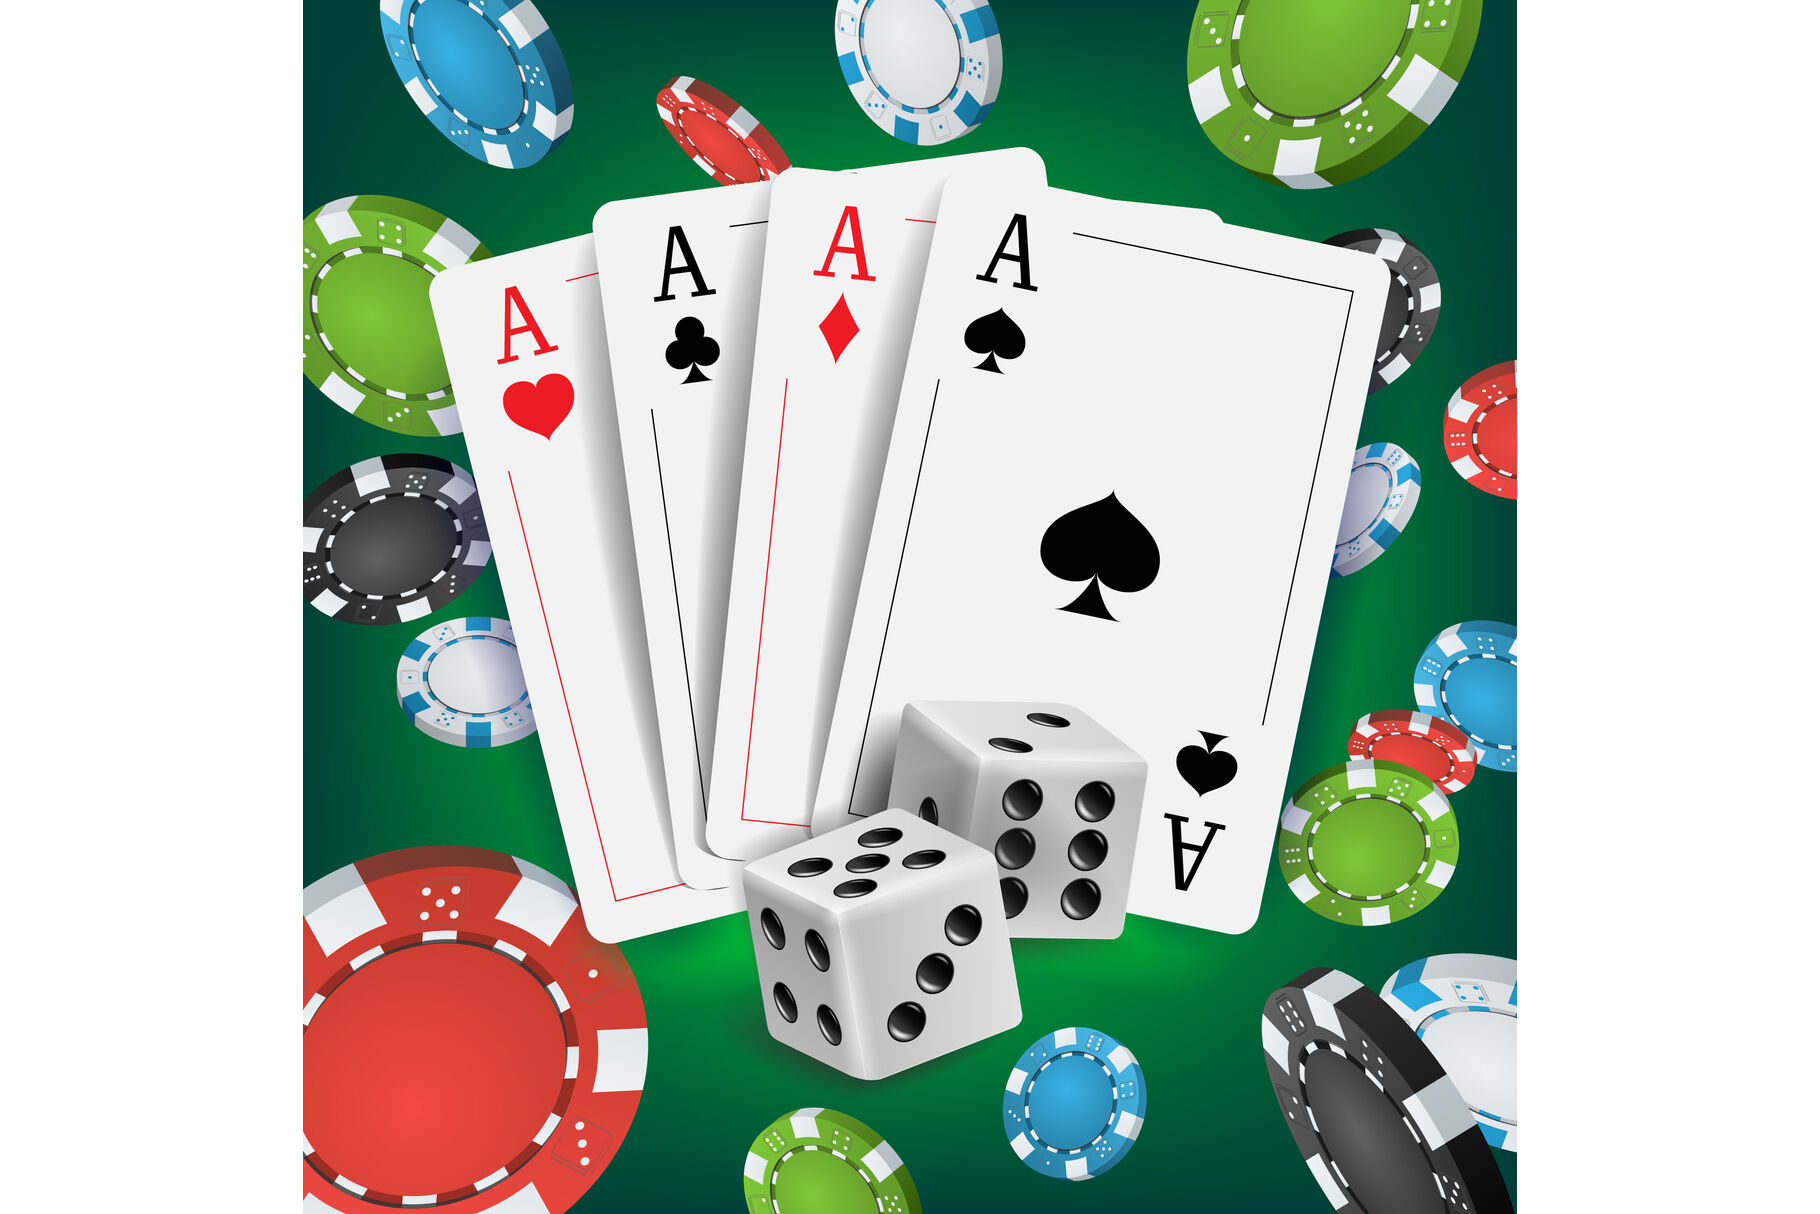 Online Poker in the Philippines: How to Find Poker Rooms